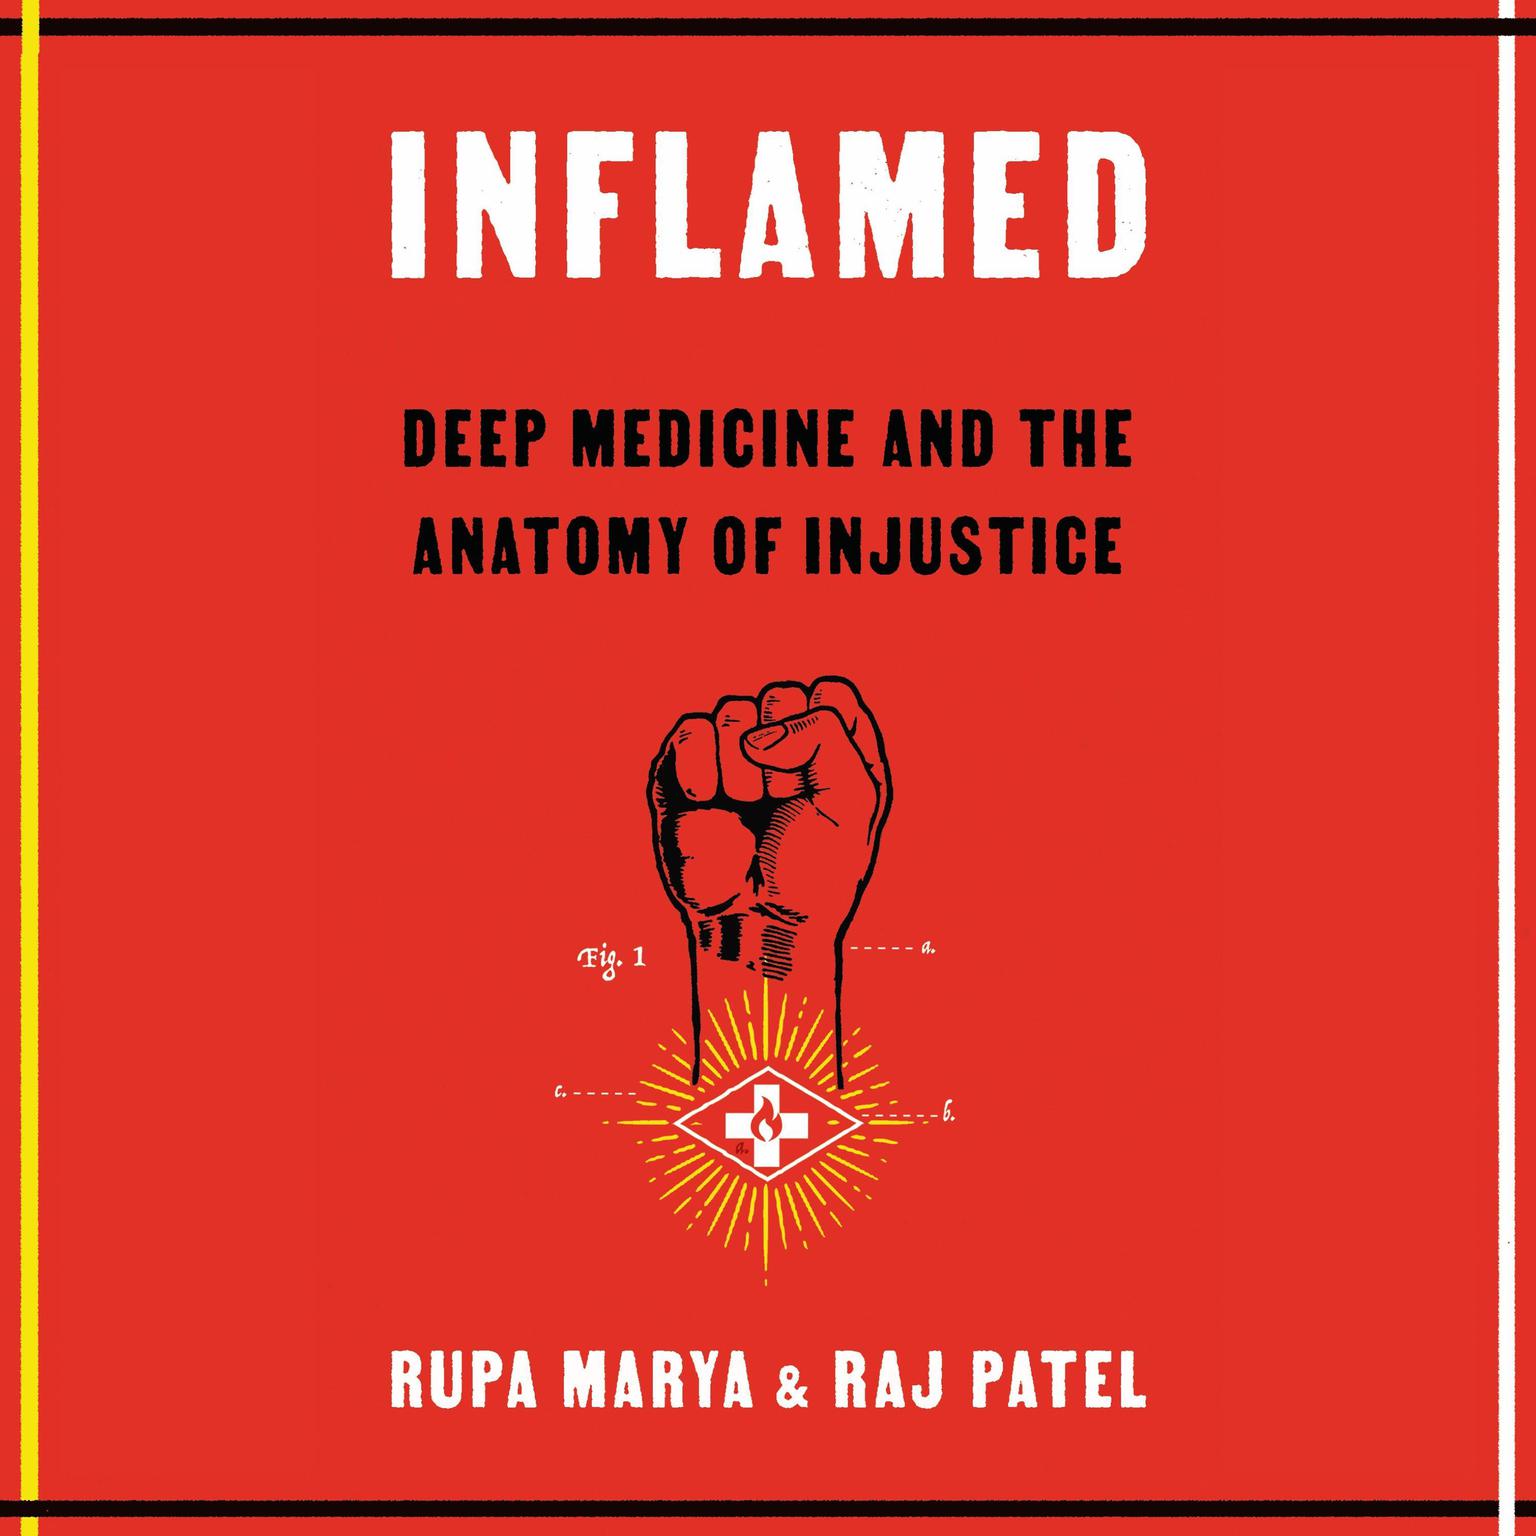 Inflamed: Deep Medicine and the Anatomy of Injustice Audiobook, by Raj Patel